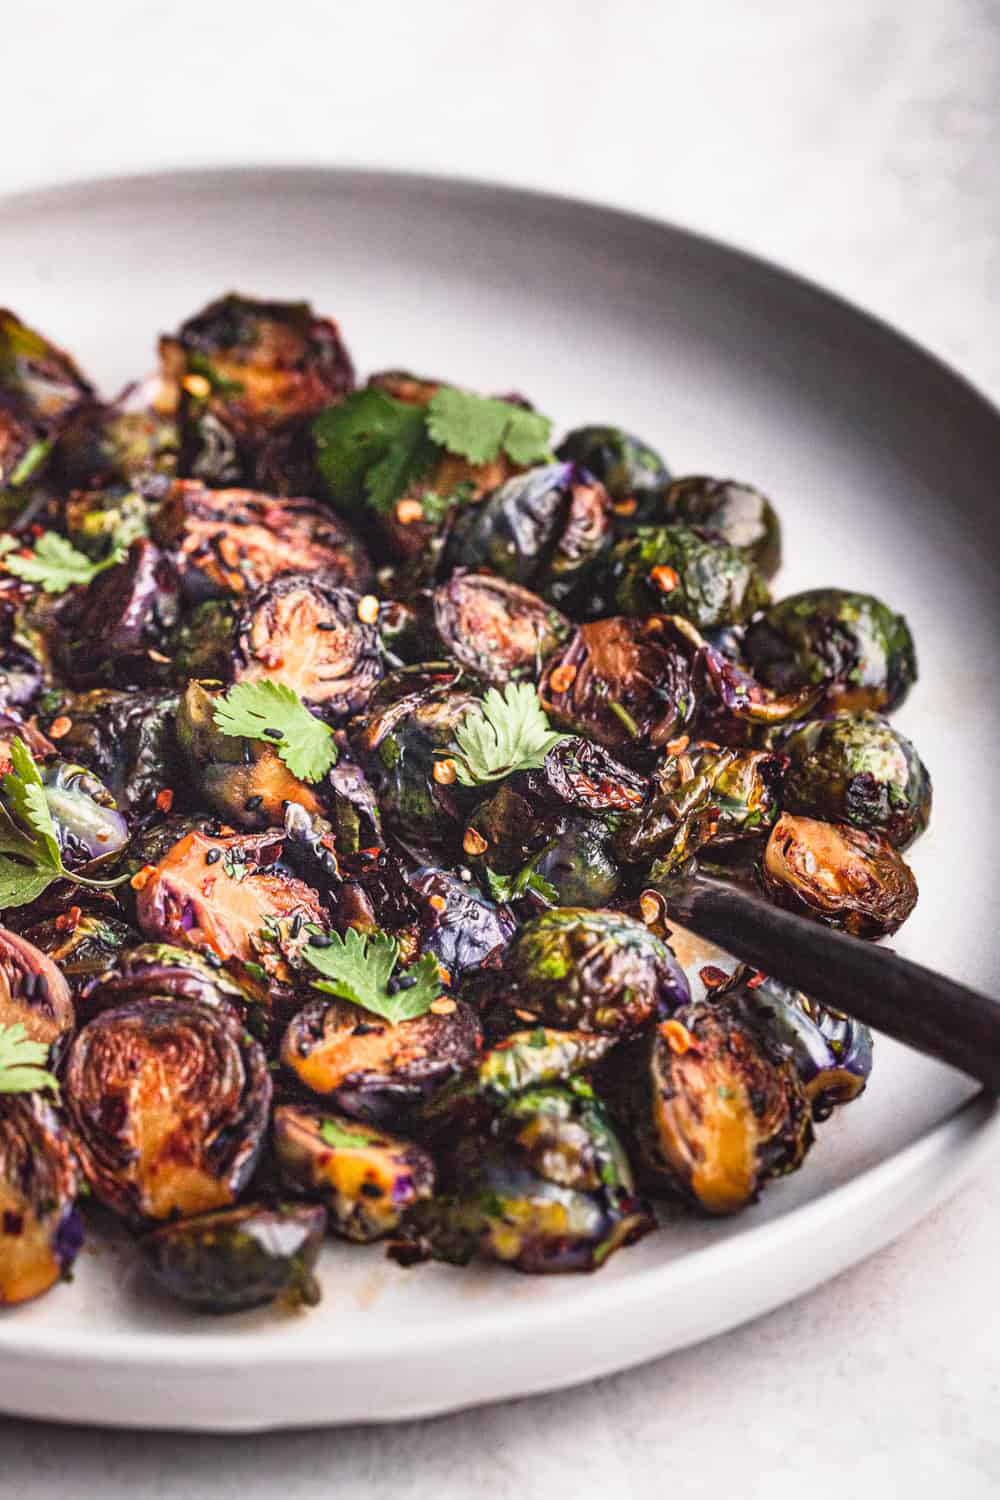 Sautéed Purple Brussel Sprouts with a sweet and sour sauce, sesame seeds and cilantro; on a white plate, side angle shot, light background.